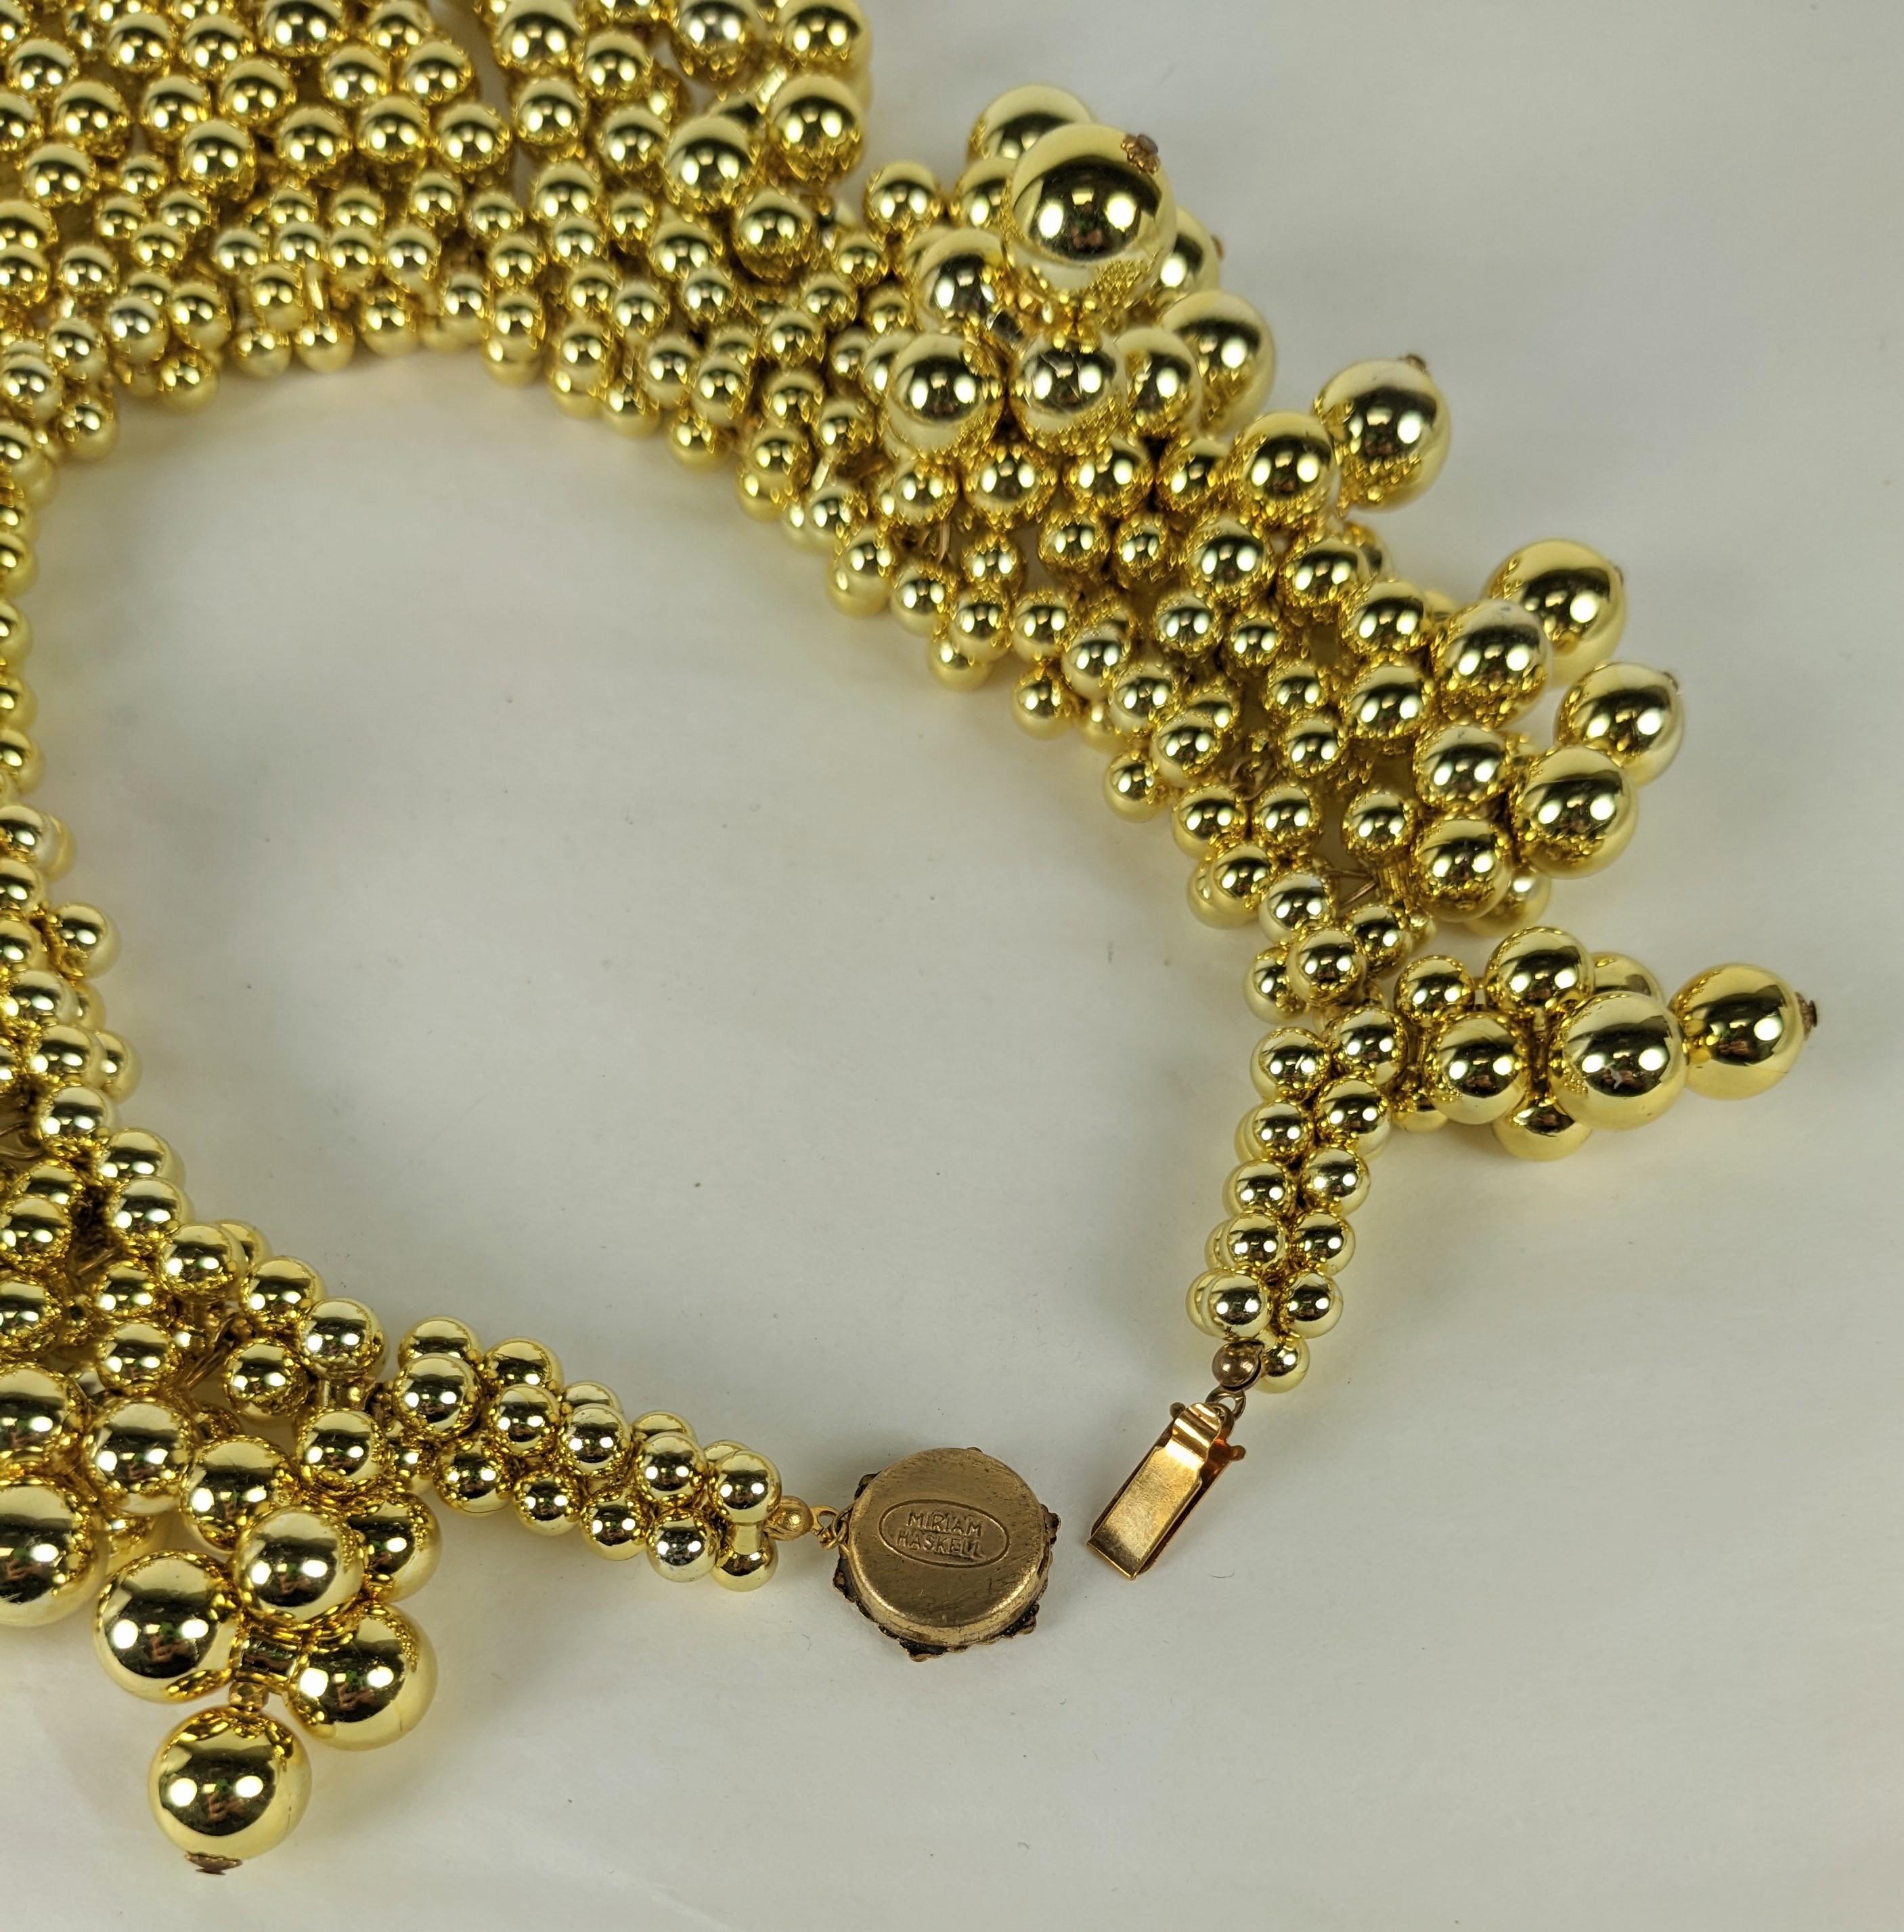 Women's or Men's Miriam Haskell Gold Bubbles Bib For Sale